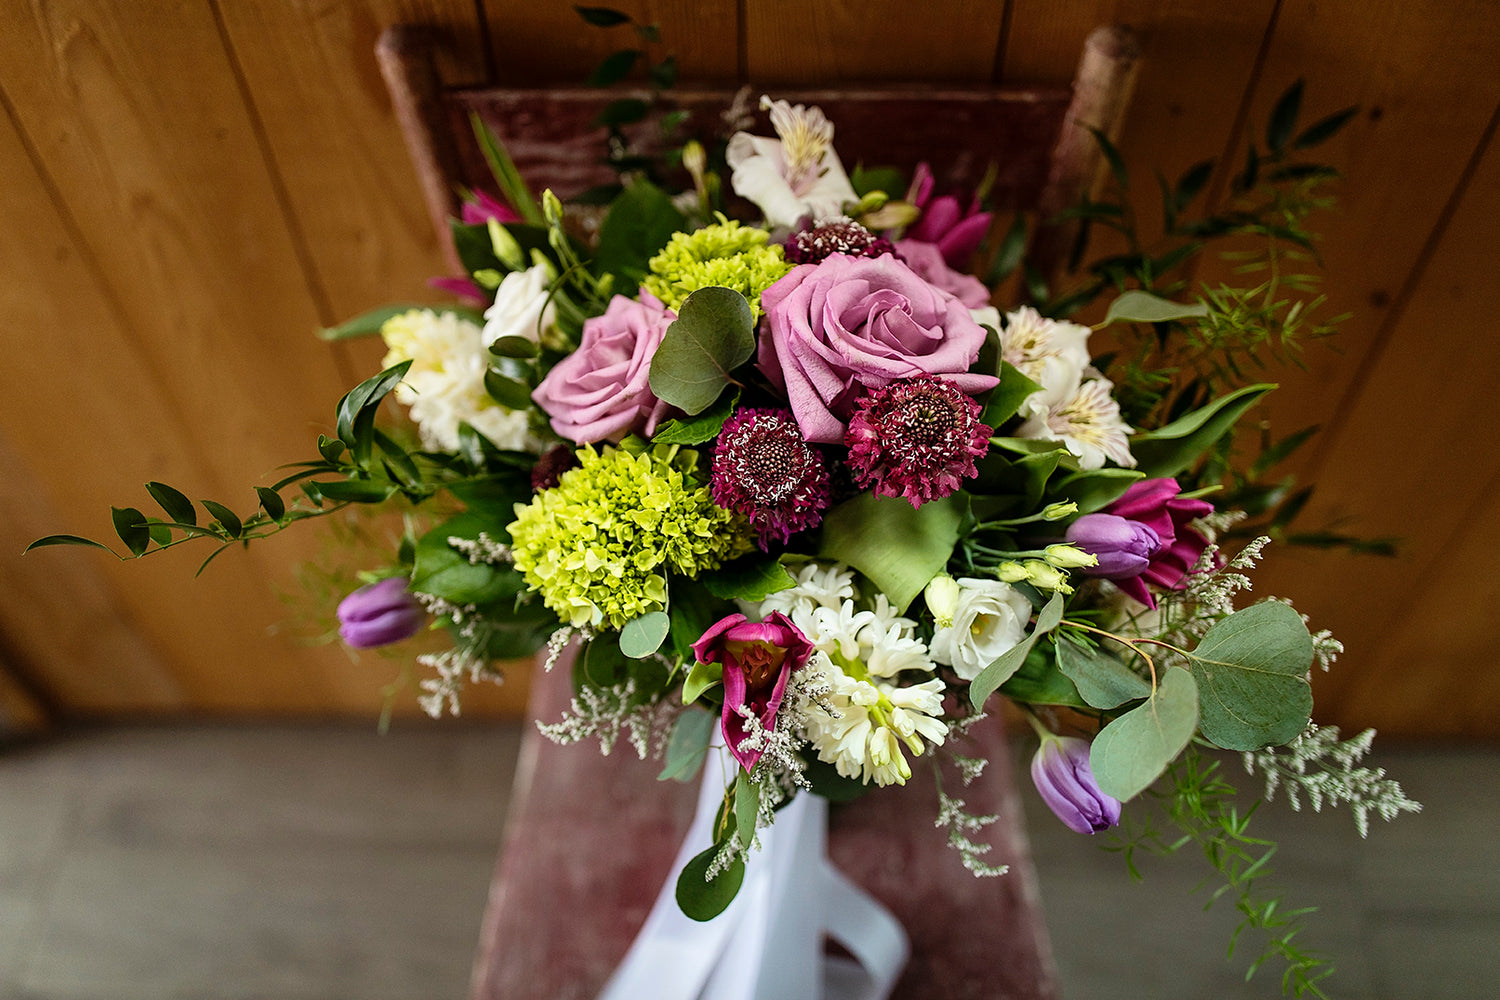 A finished bouquet created with green, white, purple, and pink flowers.